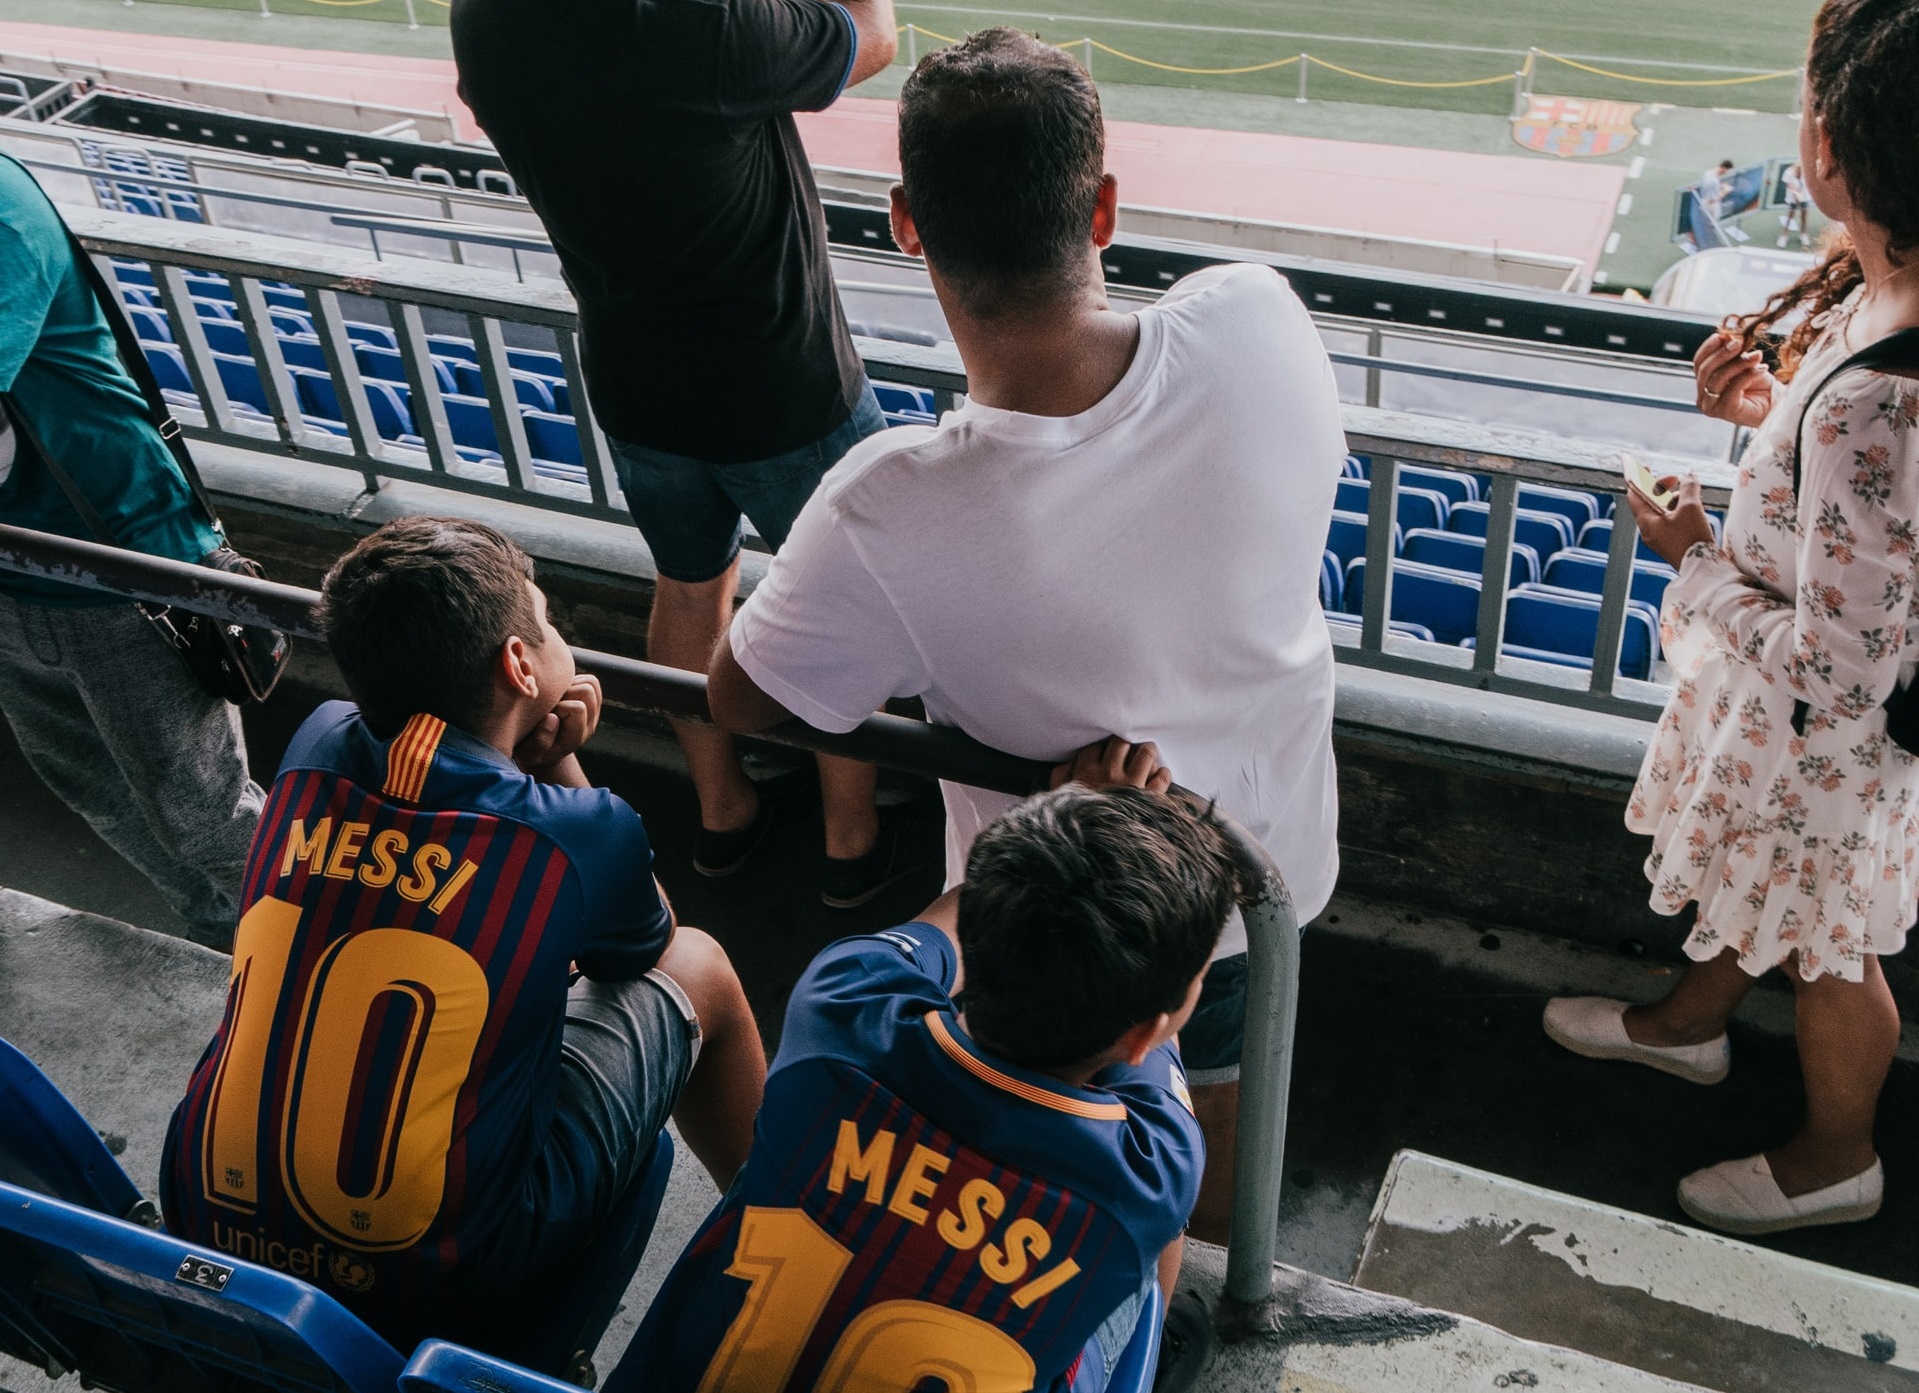 kids with Messi jerseys